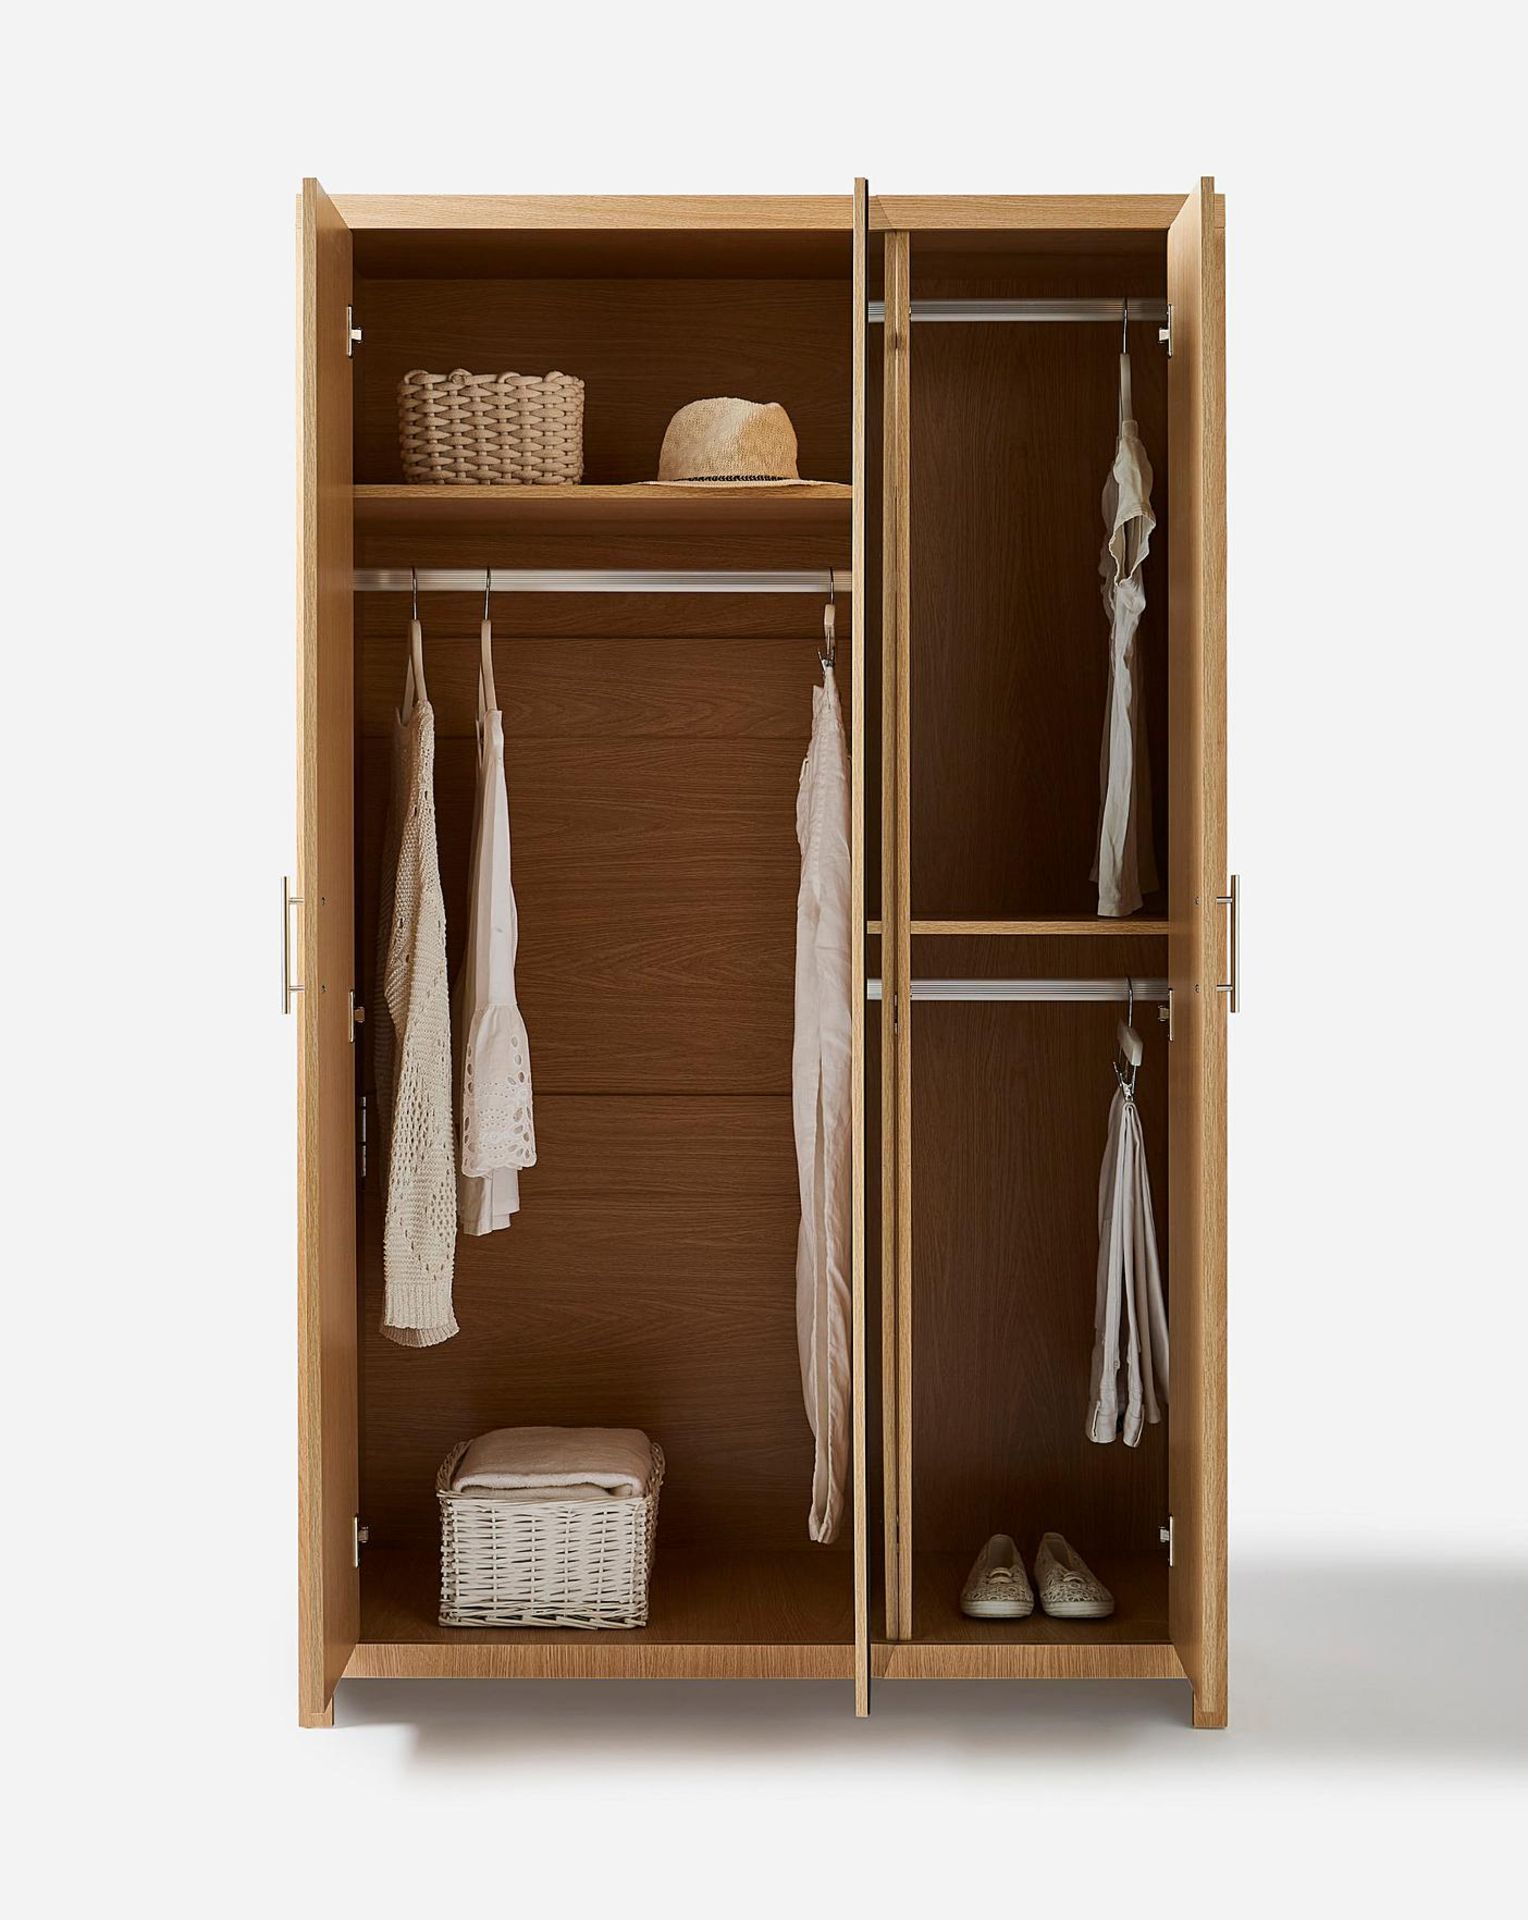 NEW & BOXED DAKOTA 3 Door Mirrored Wardrobe - OAK EFFECT. RRP £299. Part of At Home Collection, - Image 3 of 3